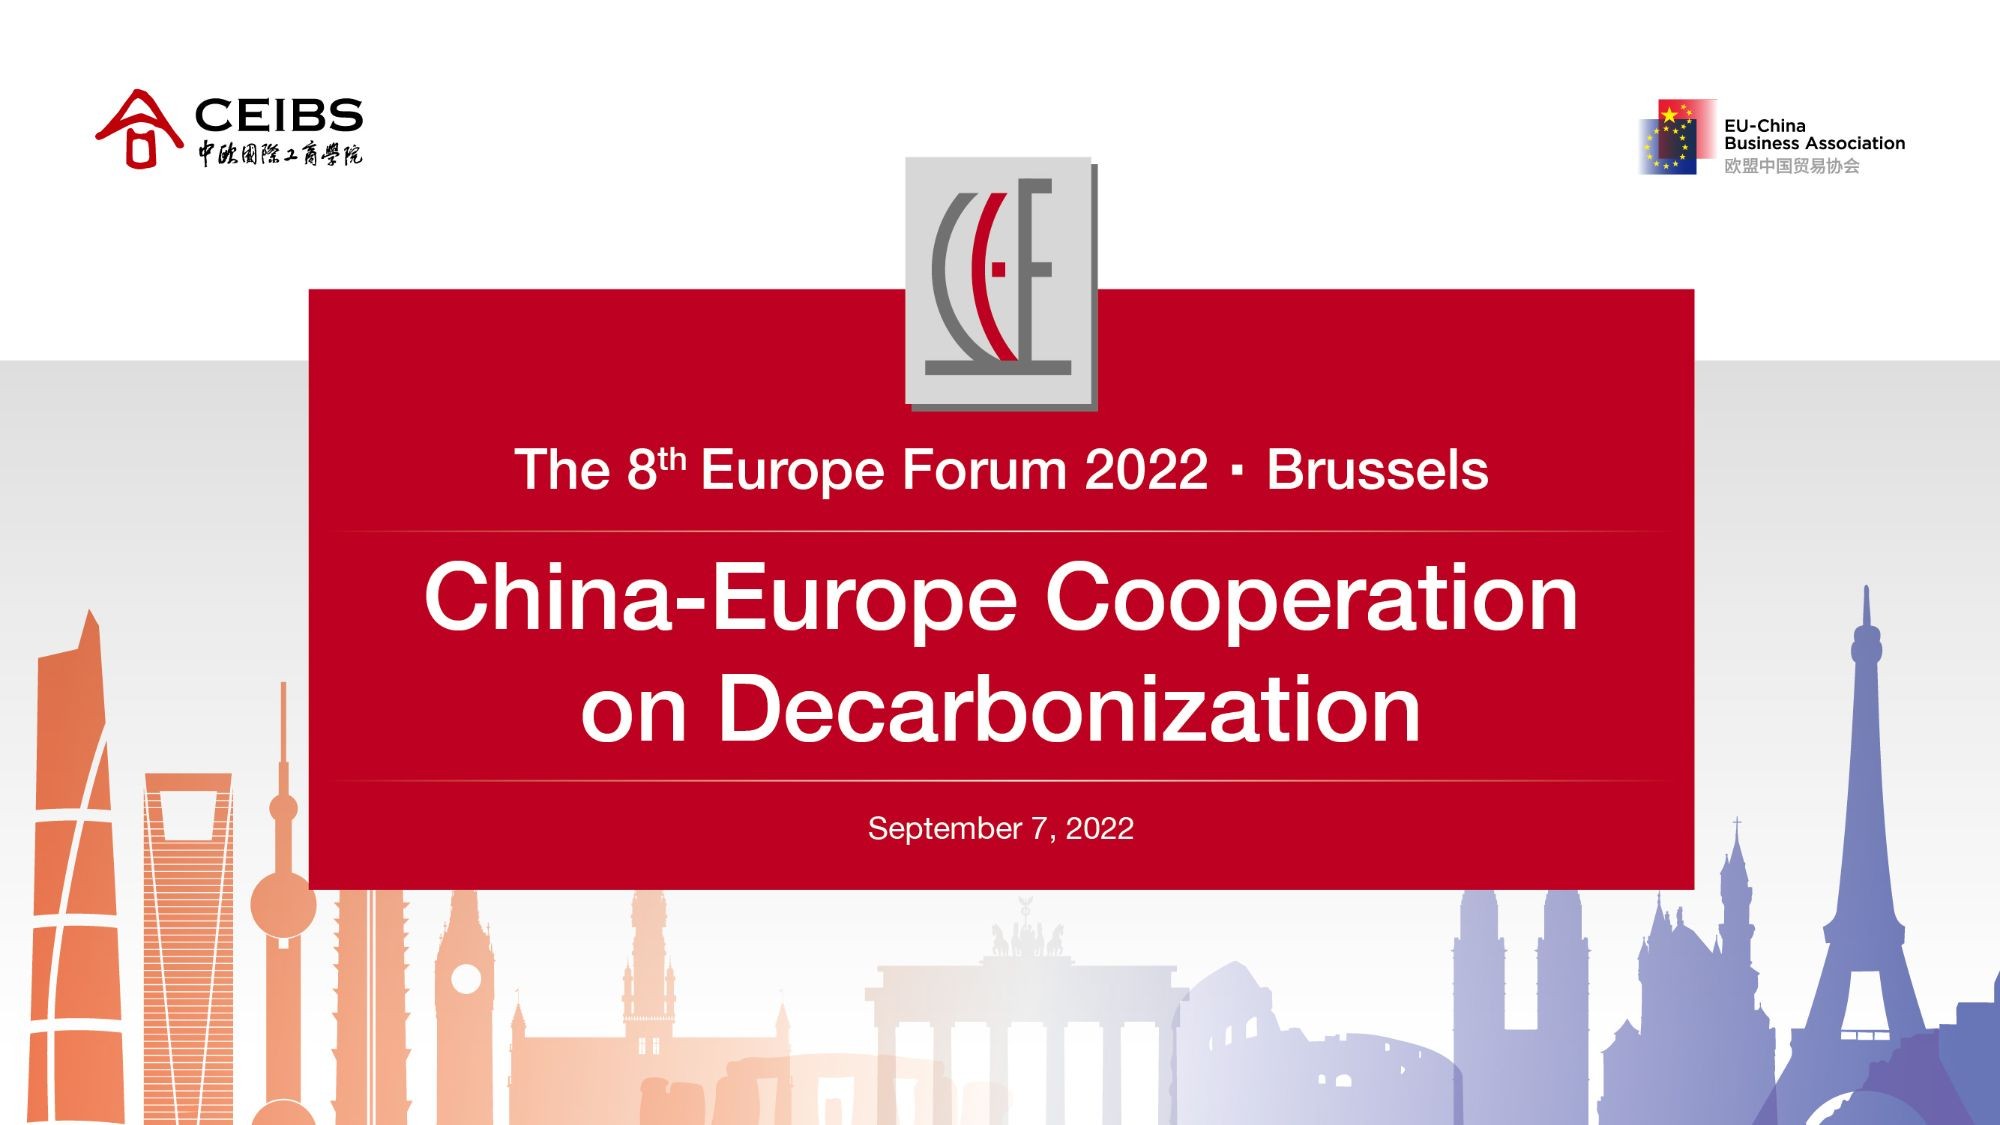 The 8th Europe Forum 2022 · Brussels - China-Europe Cooperation on Decarbonization - September 7, 2022